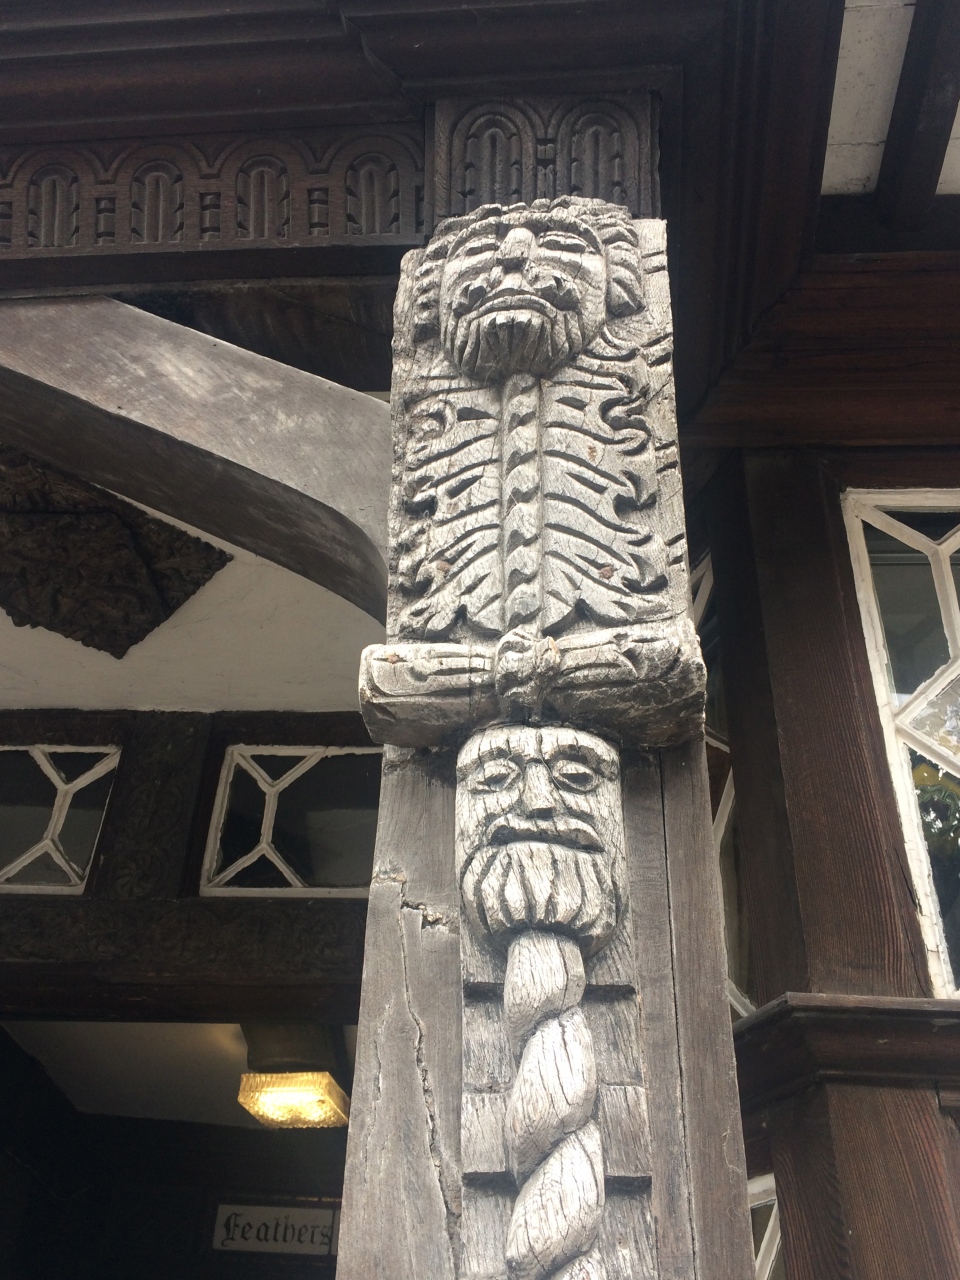 These fabulous old carvings adorn the building